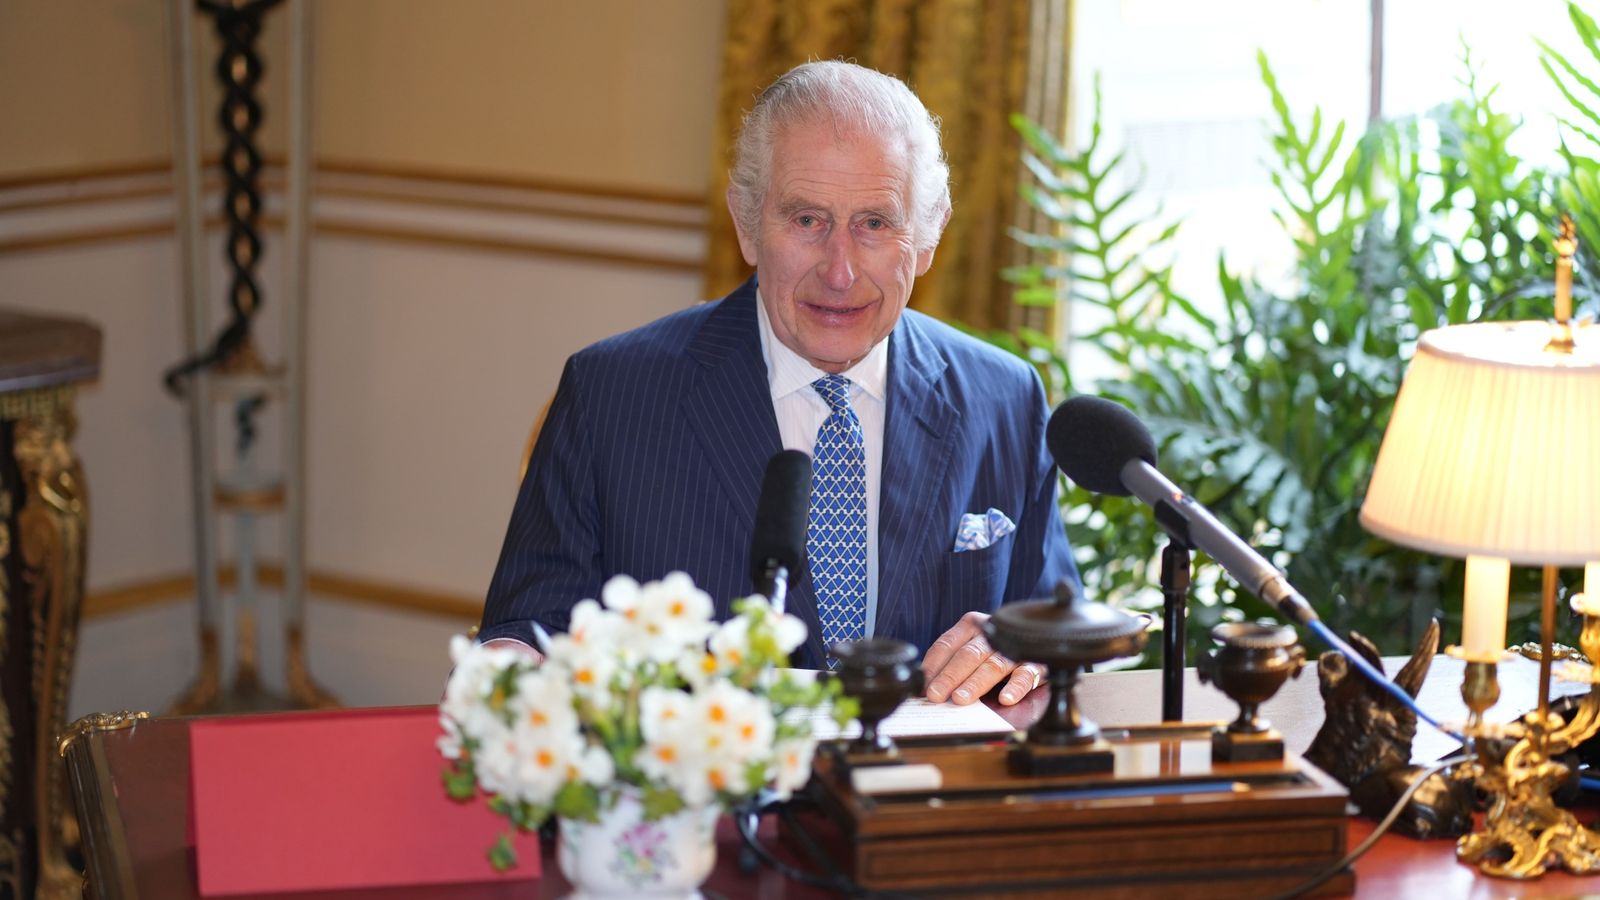 King delivers personal Easter message following cancer diagnosis